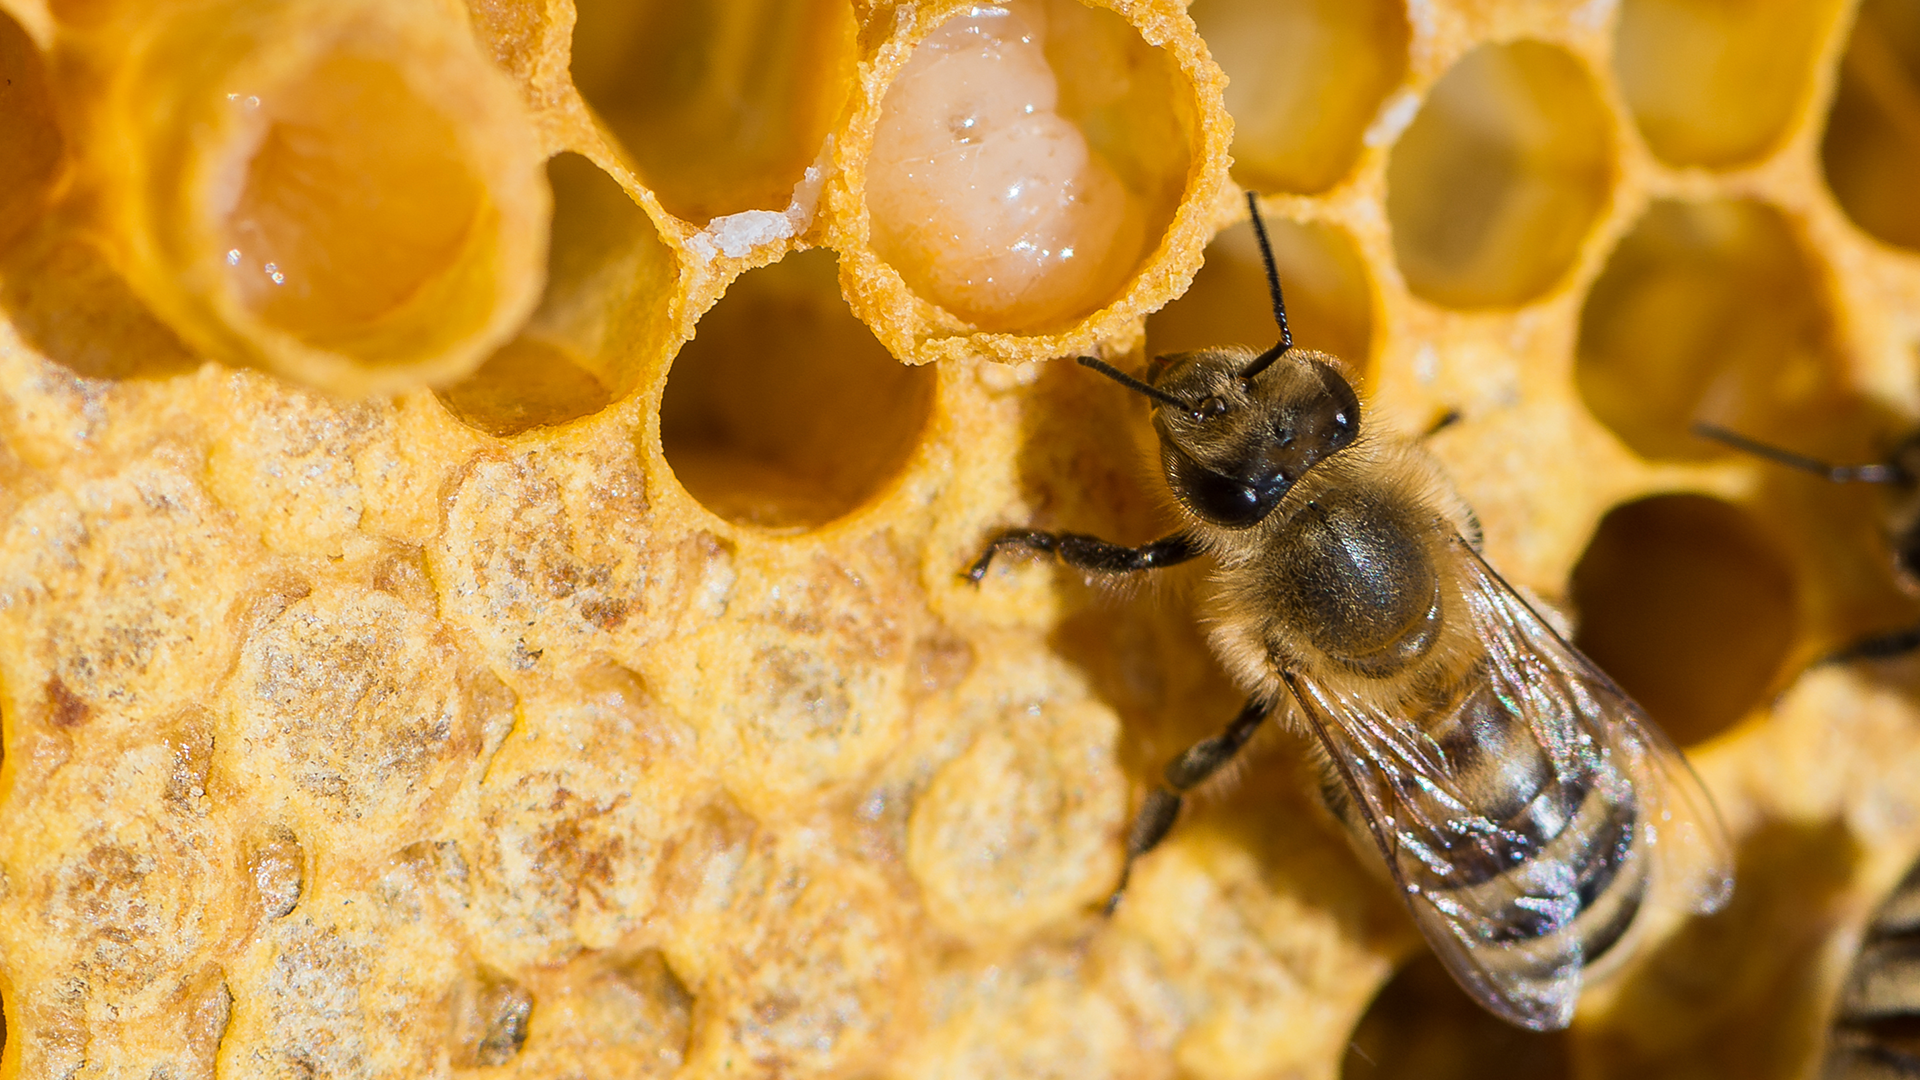 Delve into the heart of the royal jelly supply chain